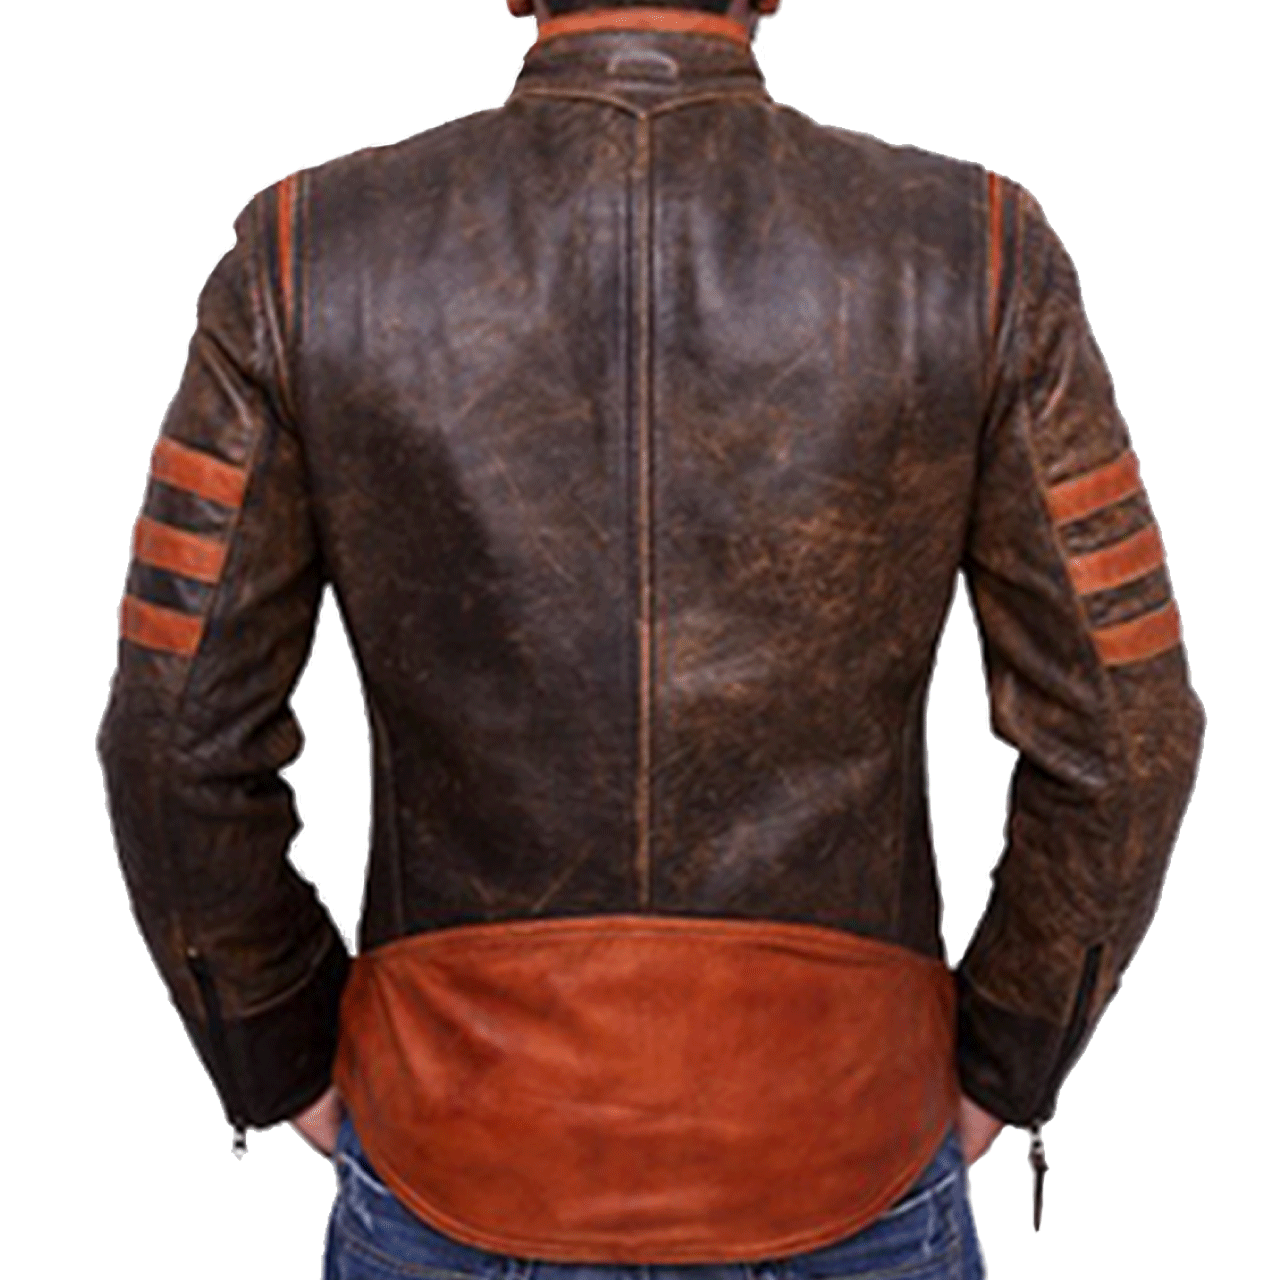 Brown Sheepskin Genuine Leather Jacket with Tan Lining